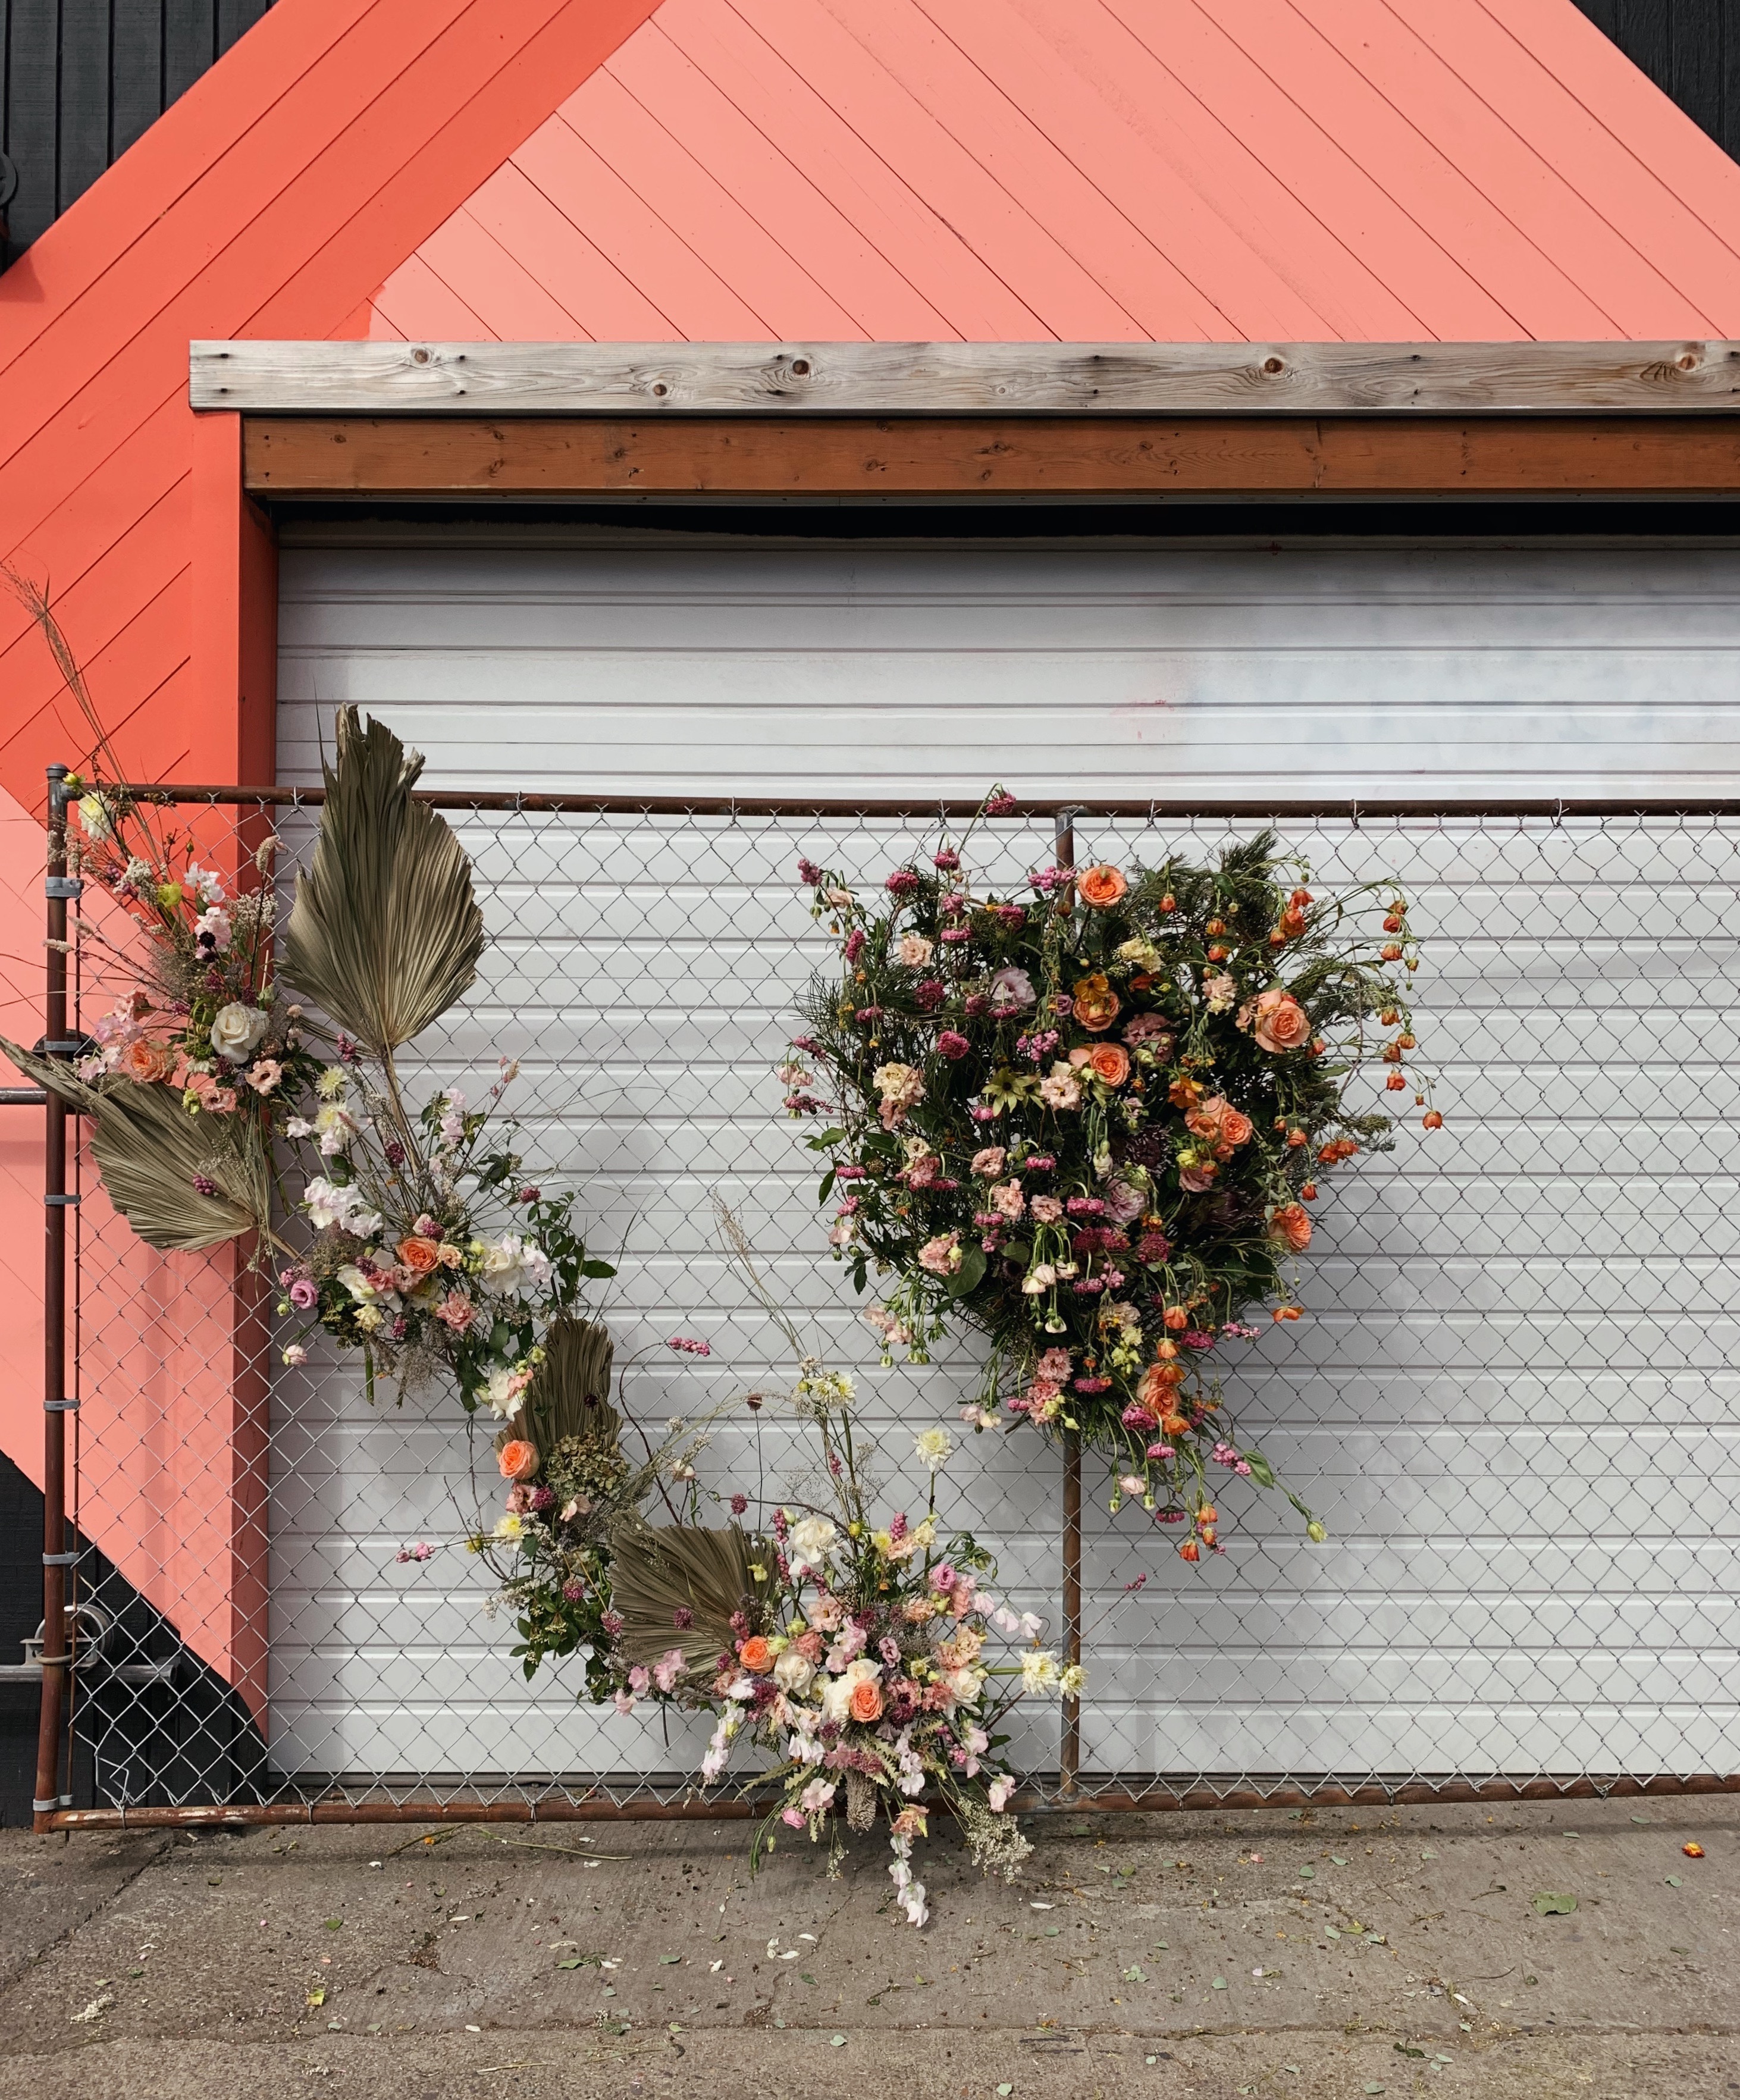 Knot and Fern Floral Design Participate in the Portland Flower Tour